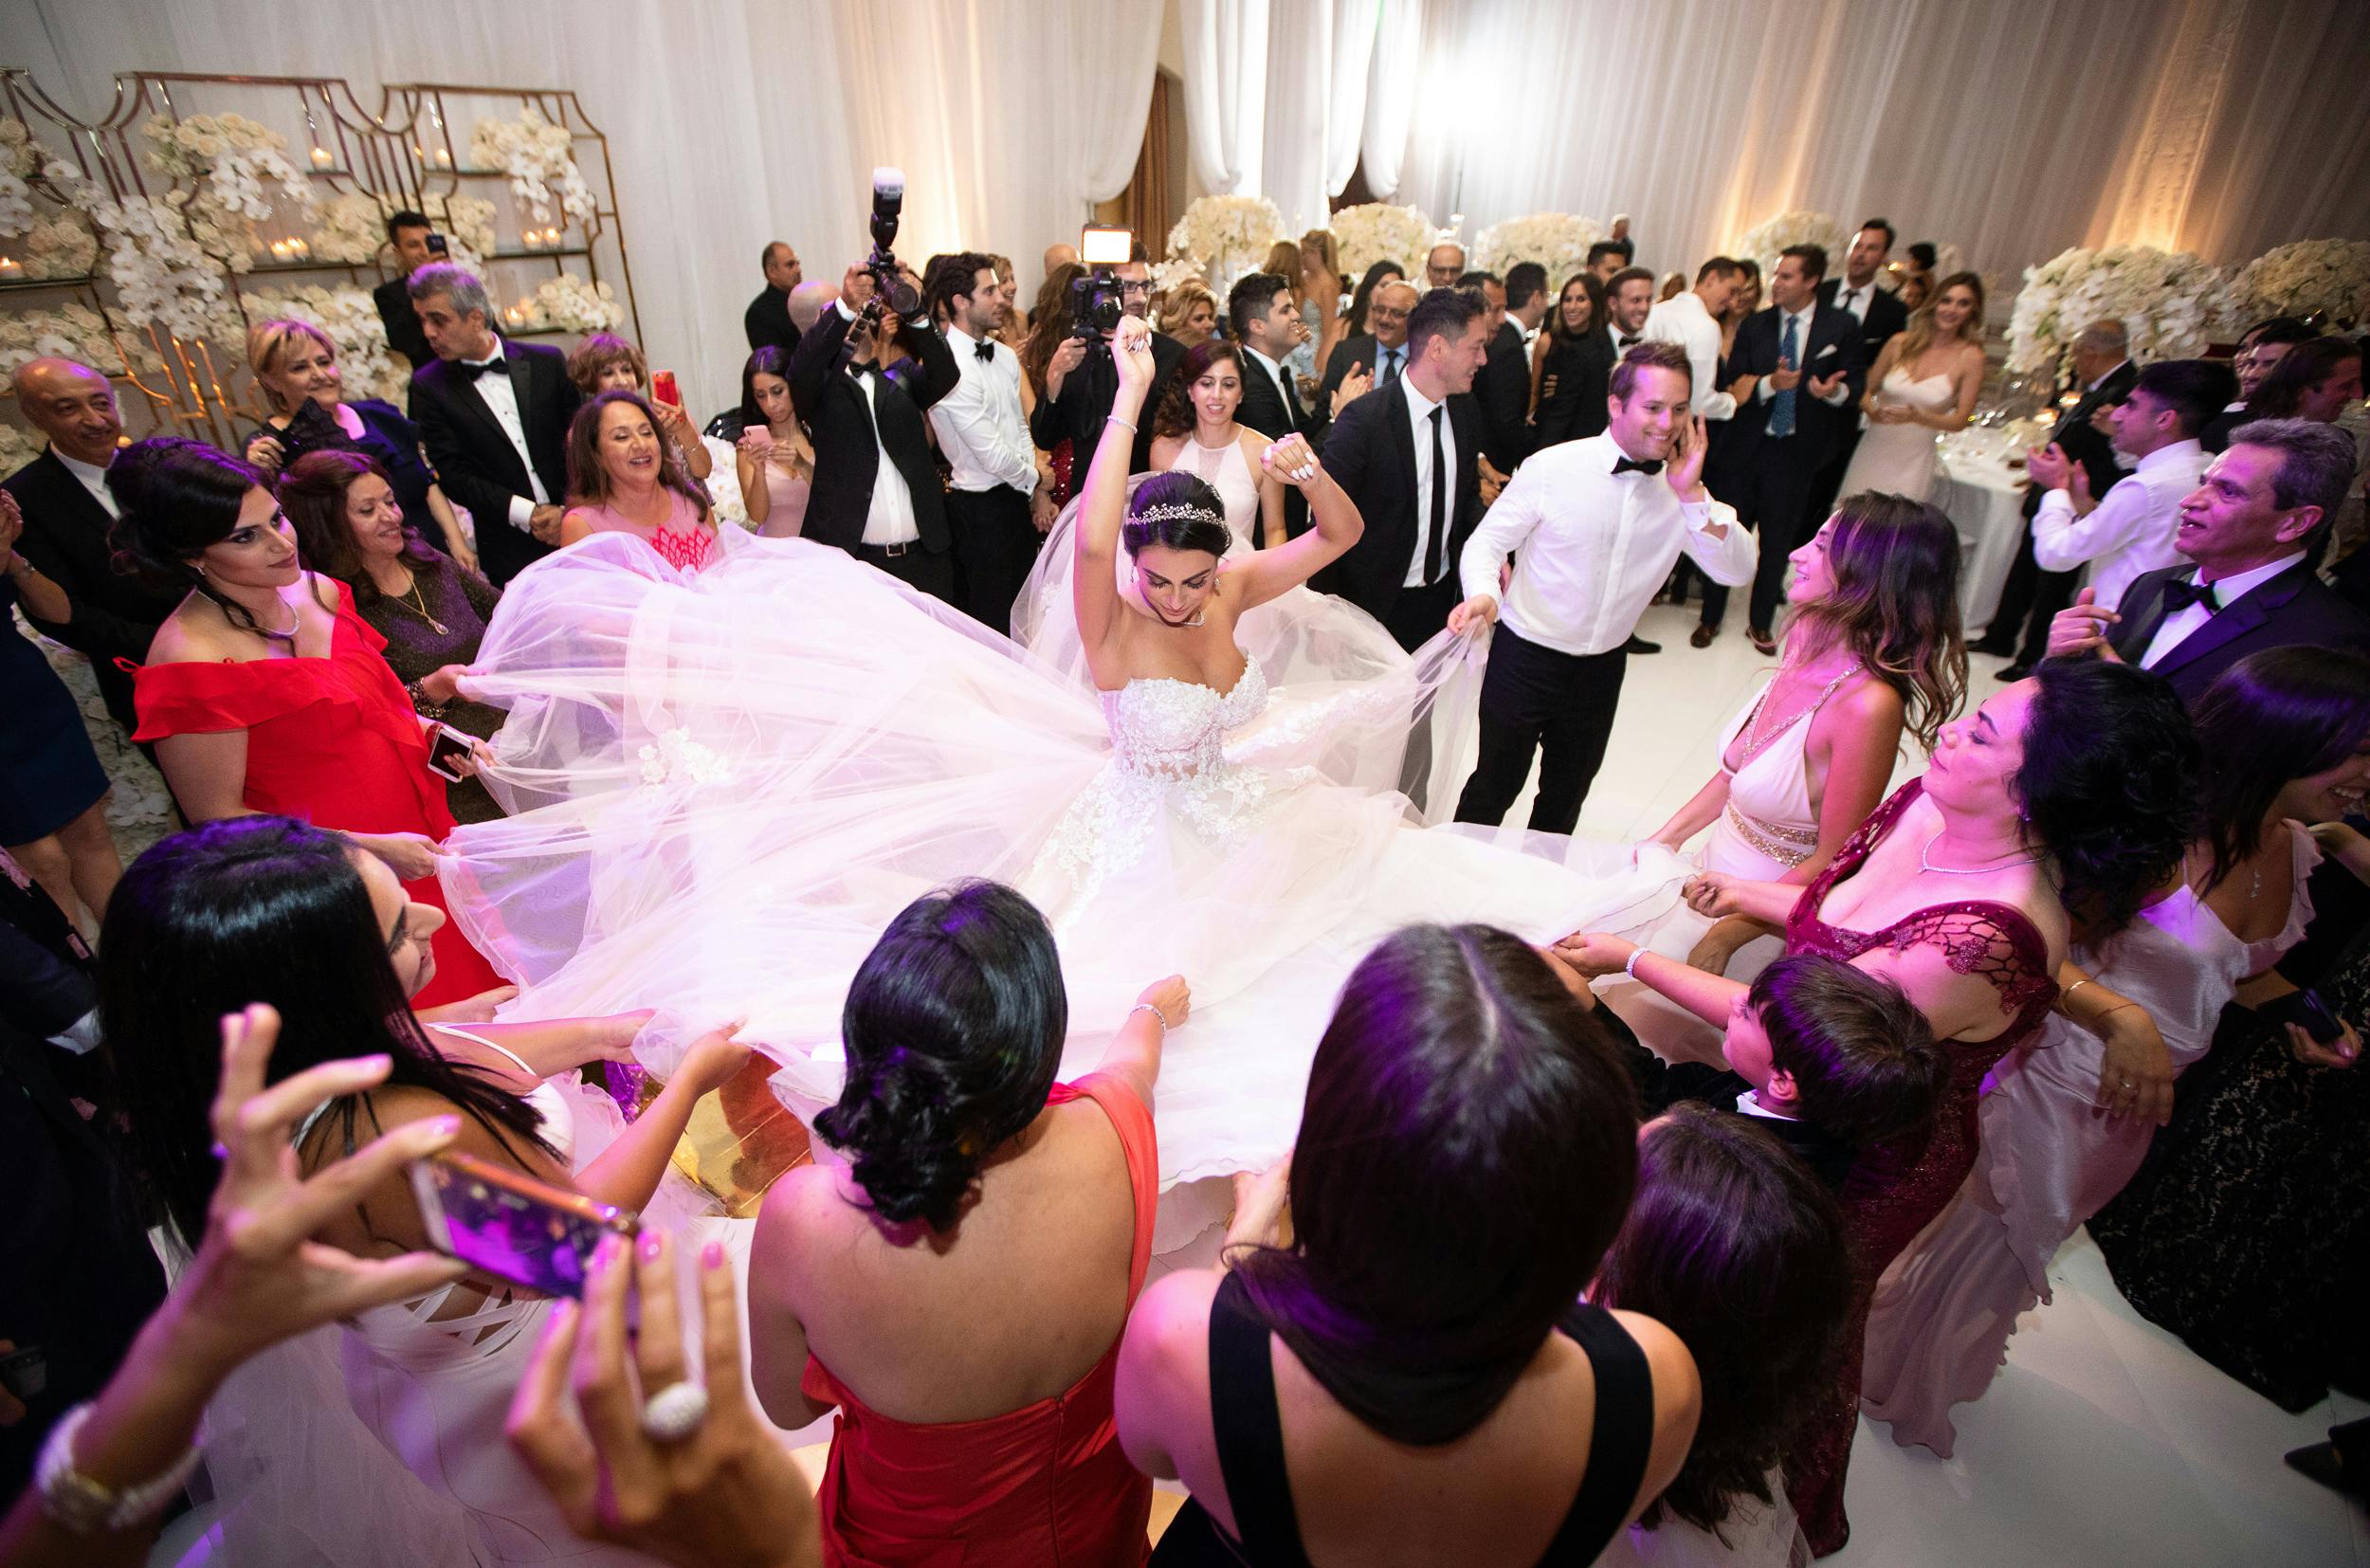 Bride twirling to showcase her dress on dance floor surrounded by wedding guests | PartySlate